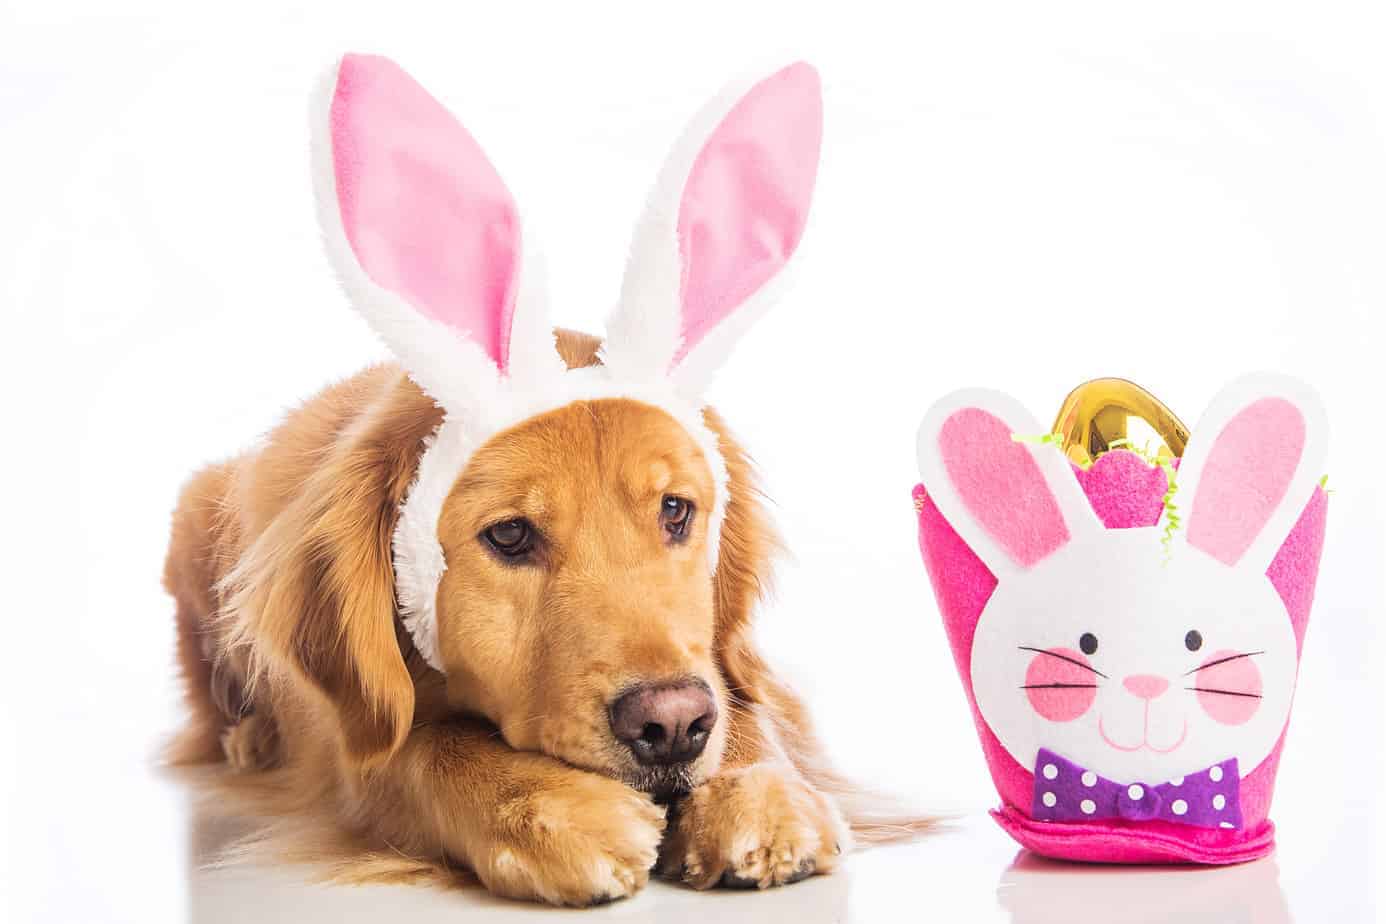 Sad golden retriever worries about Easter foods dangerous for dogs